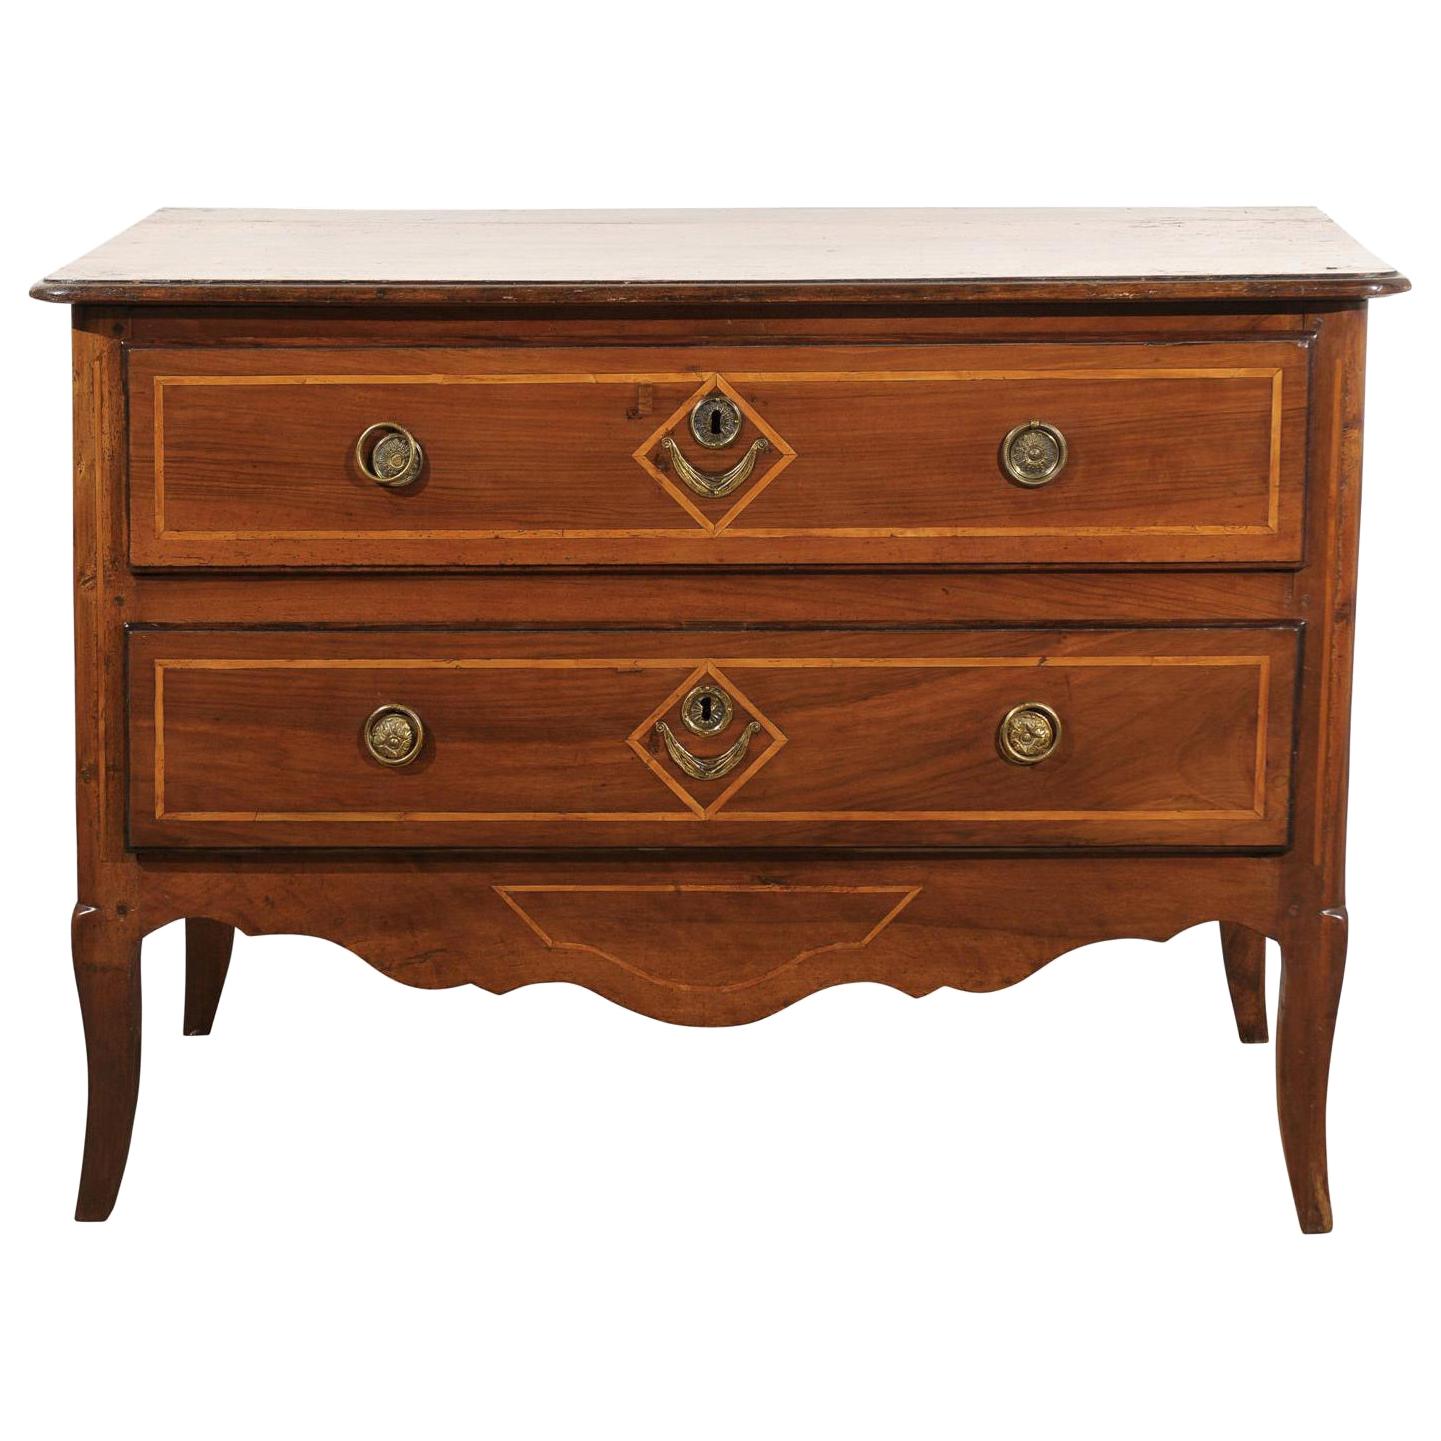 French Directoire Two-Drawer Walnut Commode with Banded Inlay from Provence